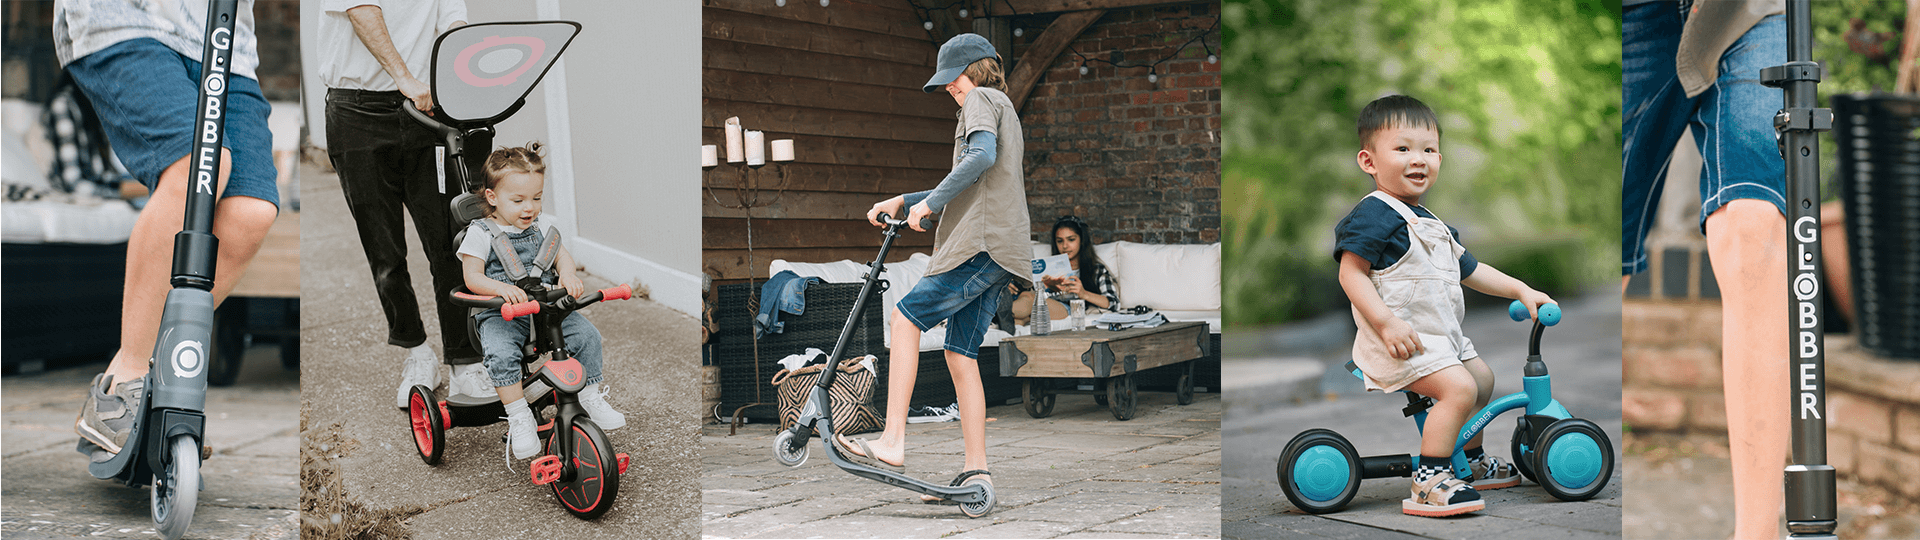 Scooters Push and Electric| Plum Play - Outdoor Play Specialists 